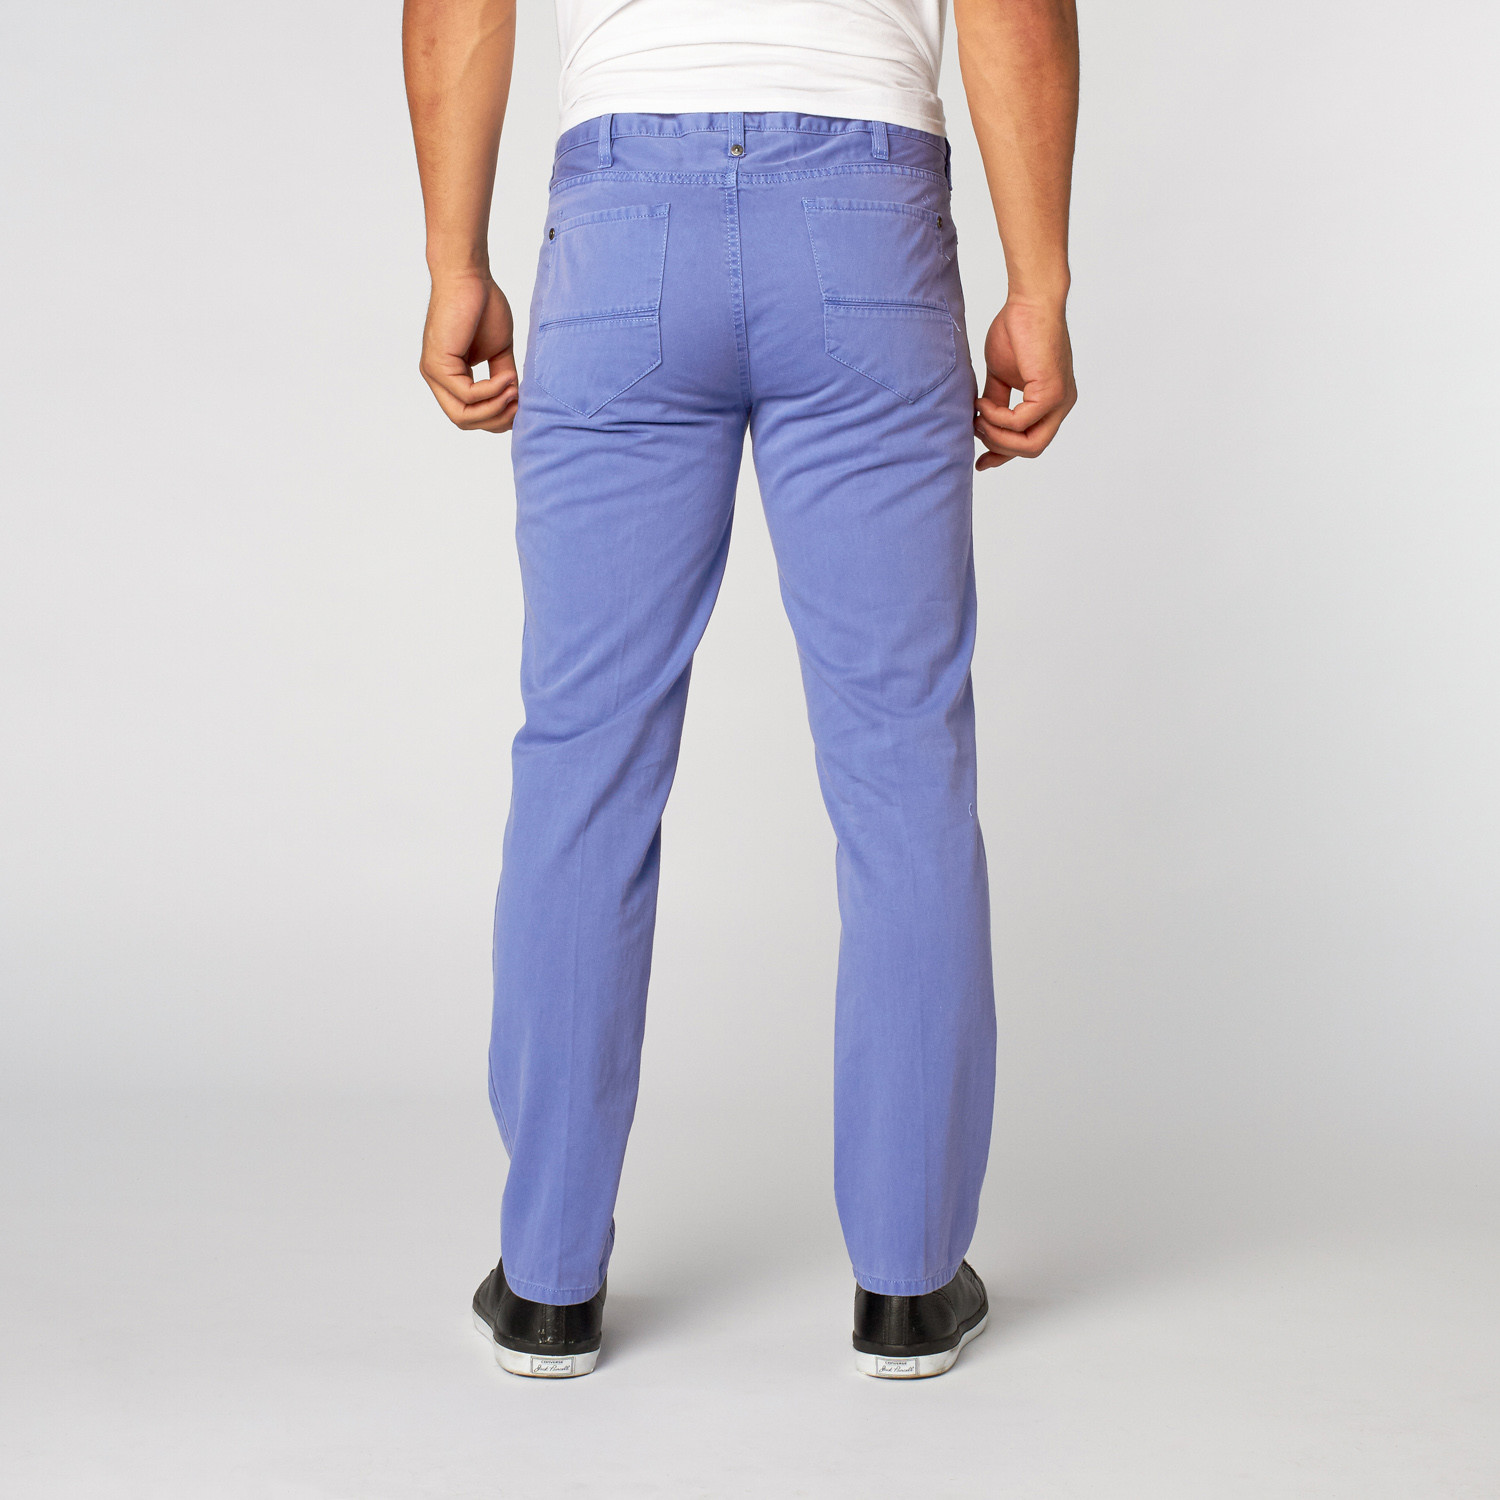 Thrill Slim Fit Pant // Periwinkle (38WX30L) - Micros - Touch of Modern